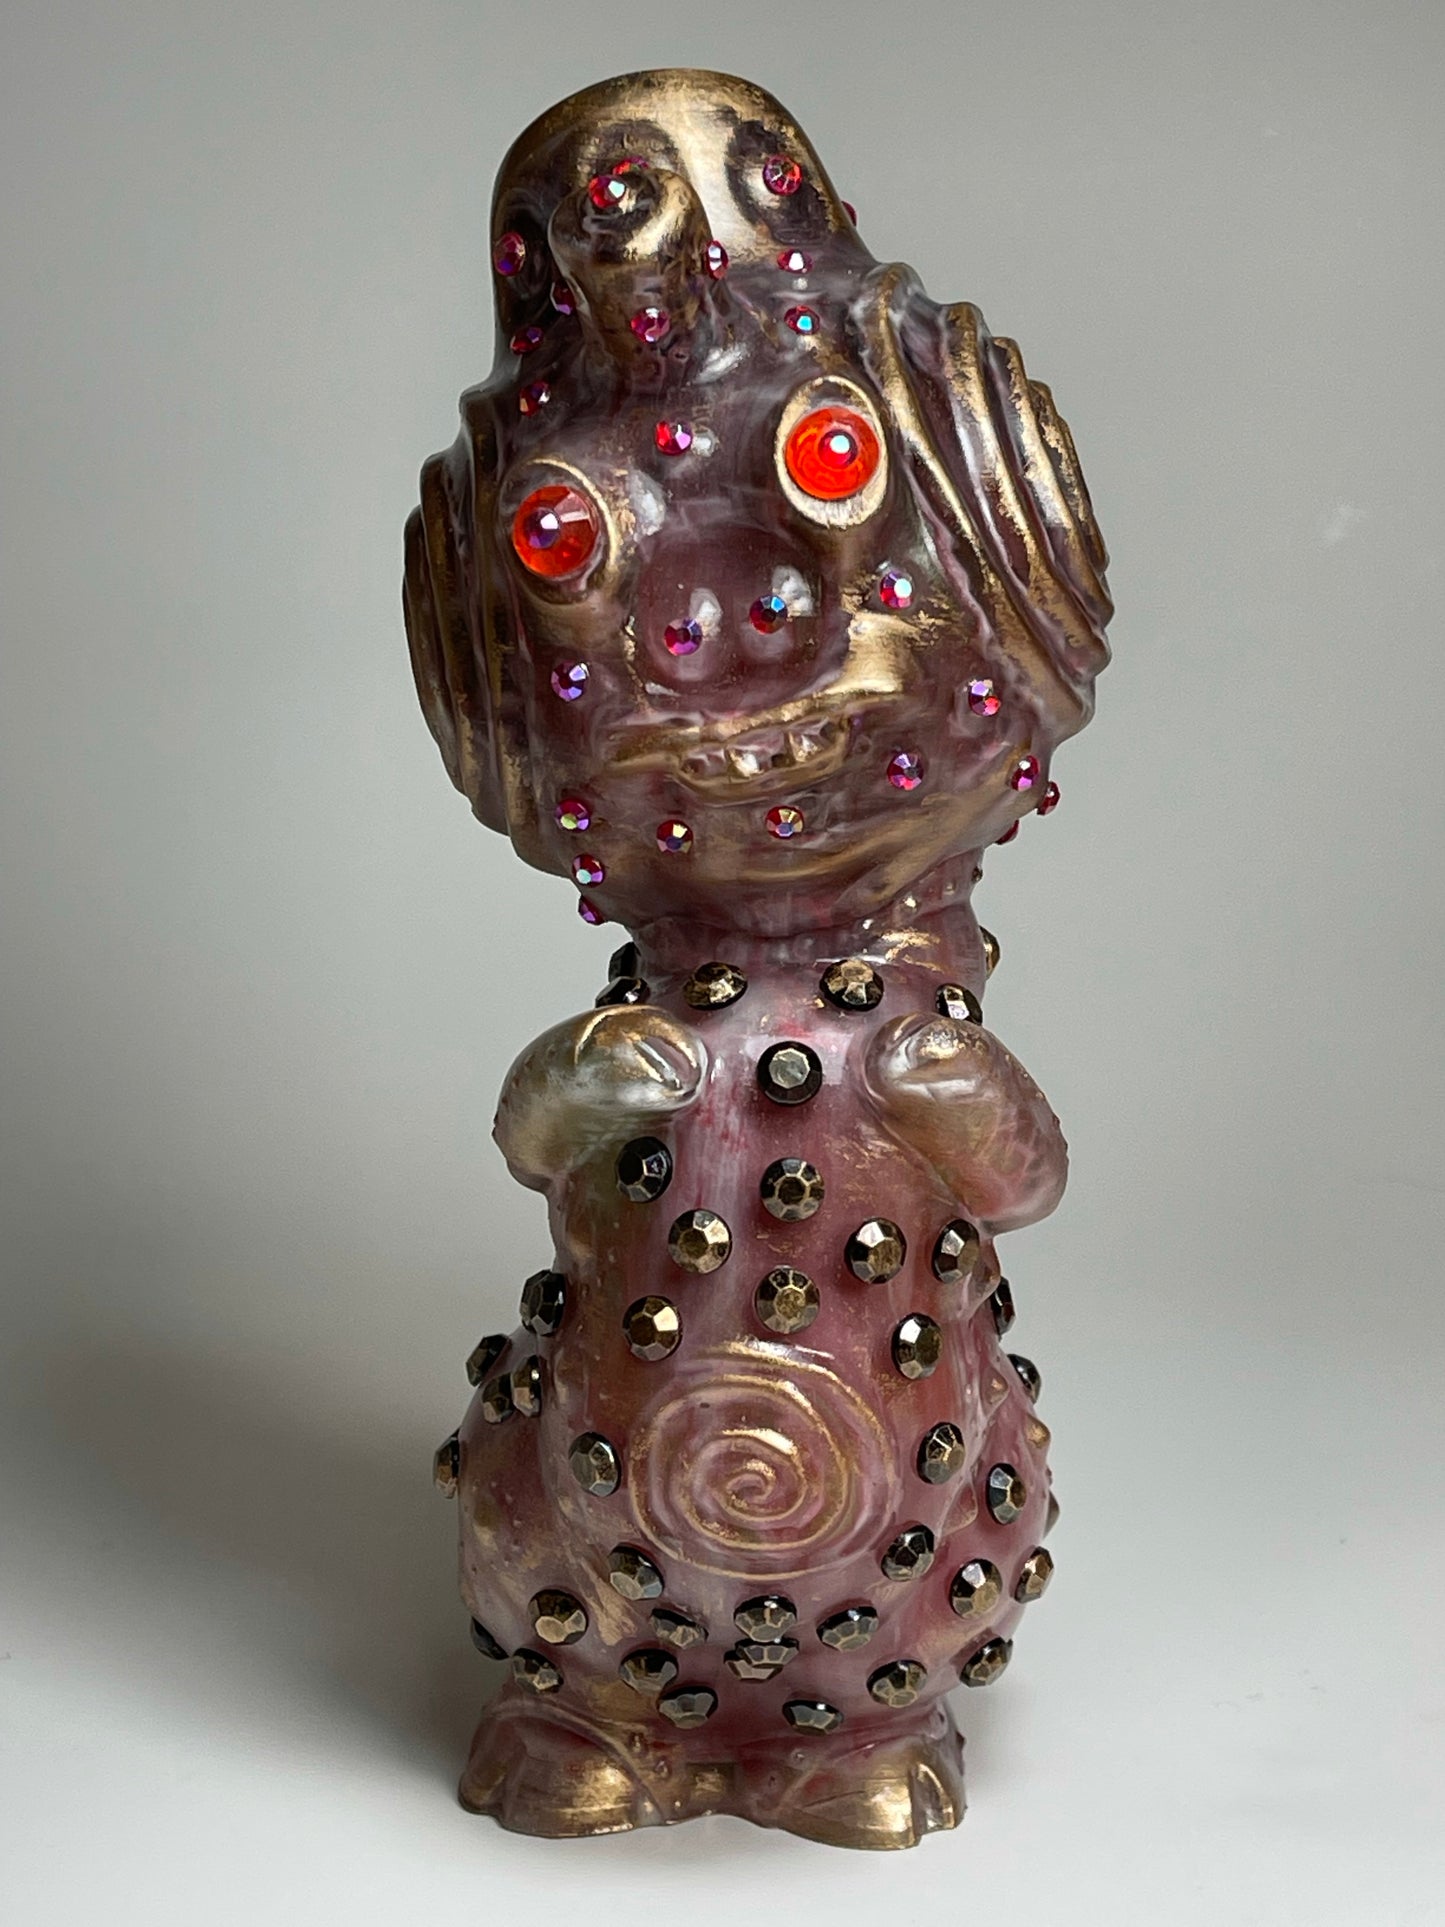 Robot Pig: Visit to the Planet of Parasitic Rhinestones